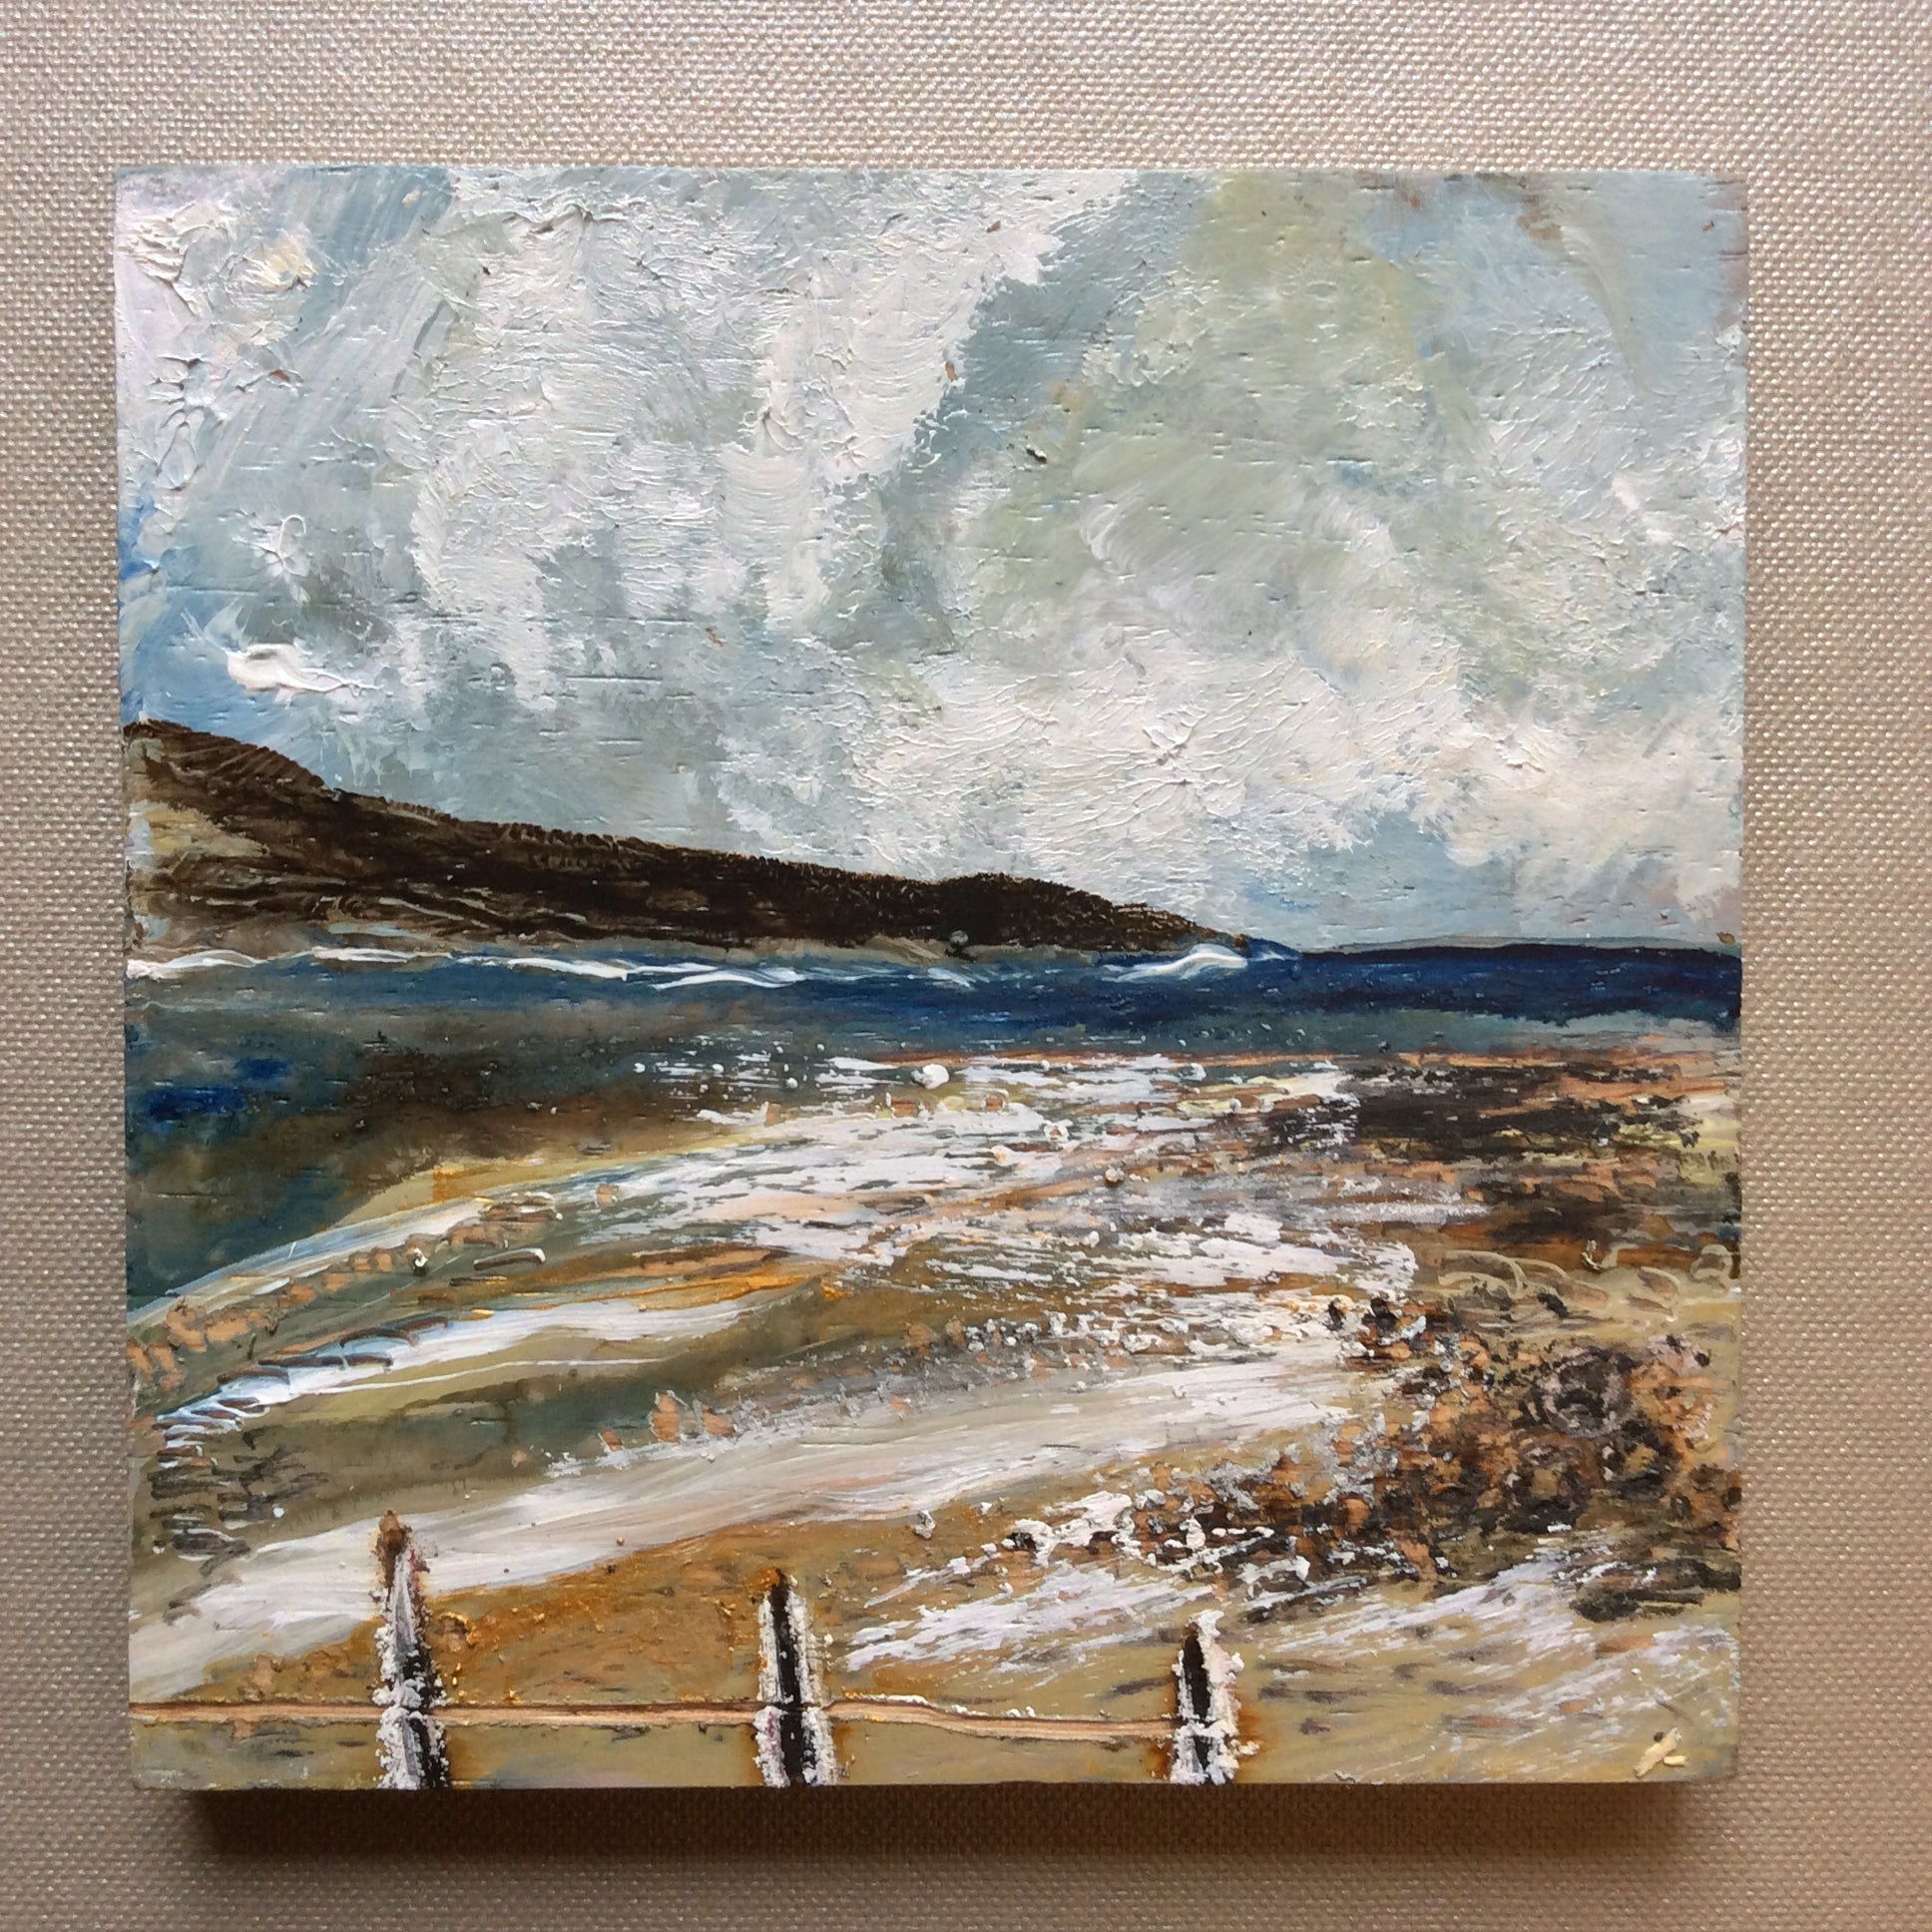 Mixed Media Art on wood By Louise O'Hara - "A shoreline at low tide”